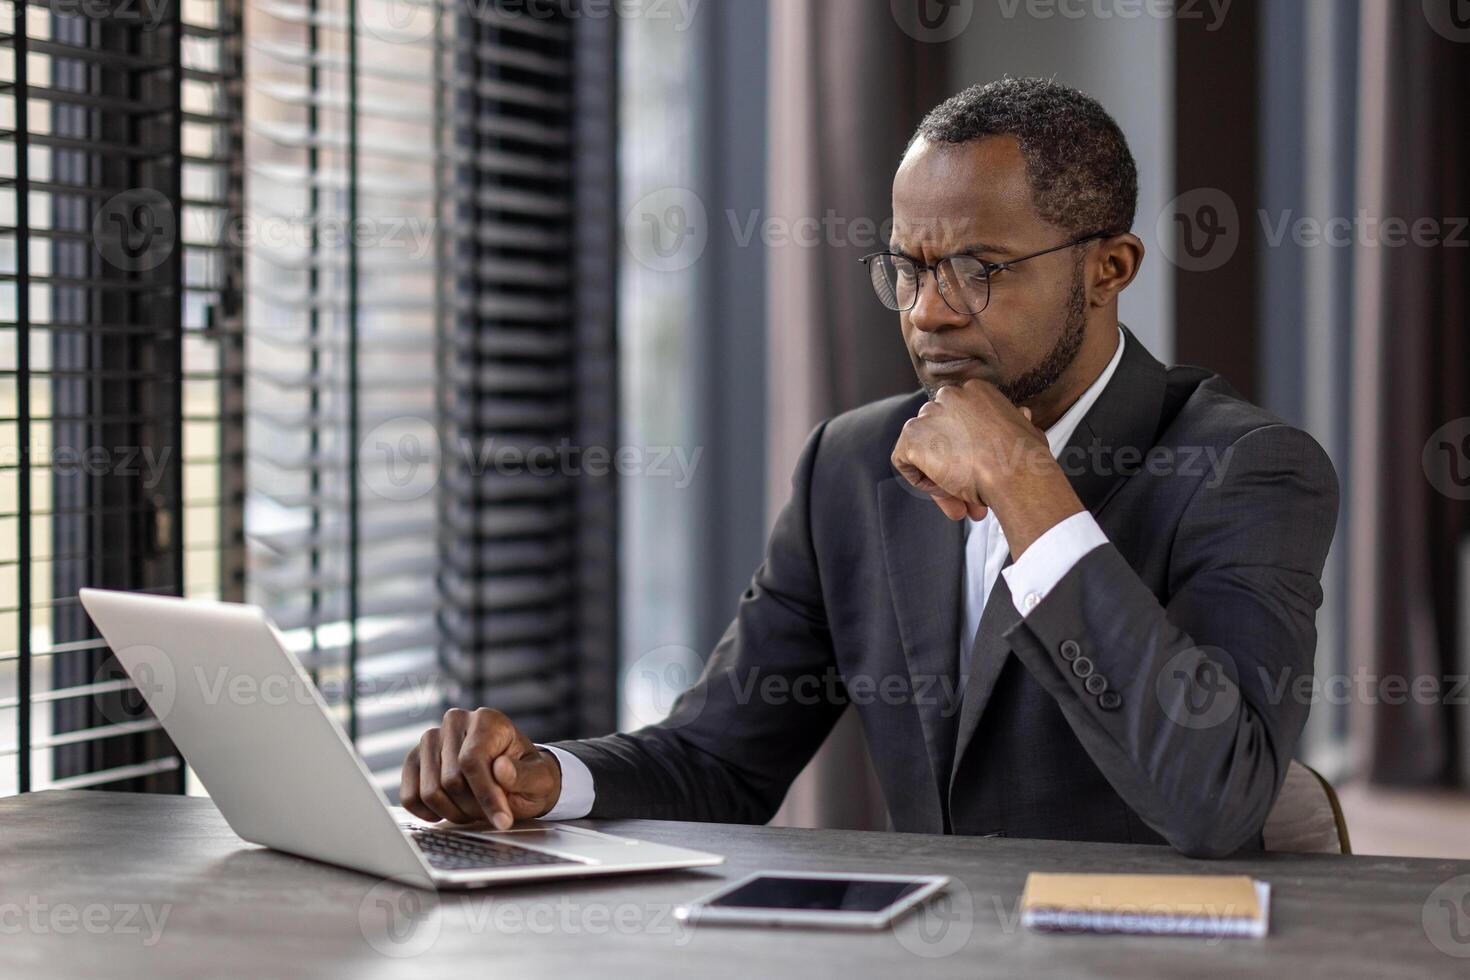 A professional businessman in a suit concentrating on his work on a laptop at a modern office desk, possibly analyzing data or planning strategies. photo